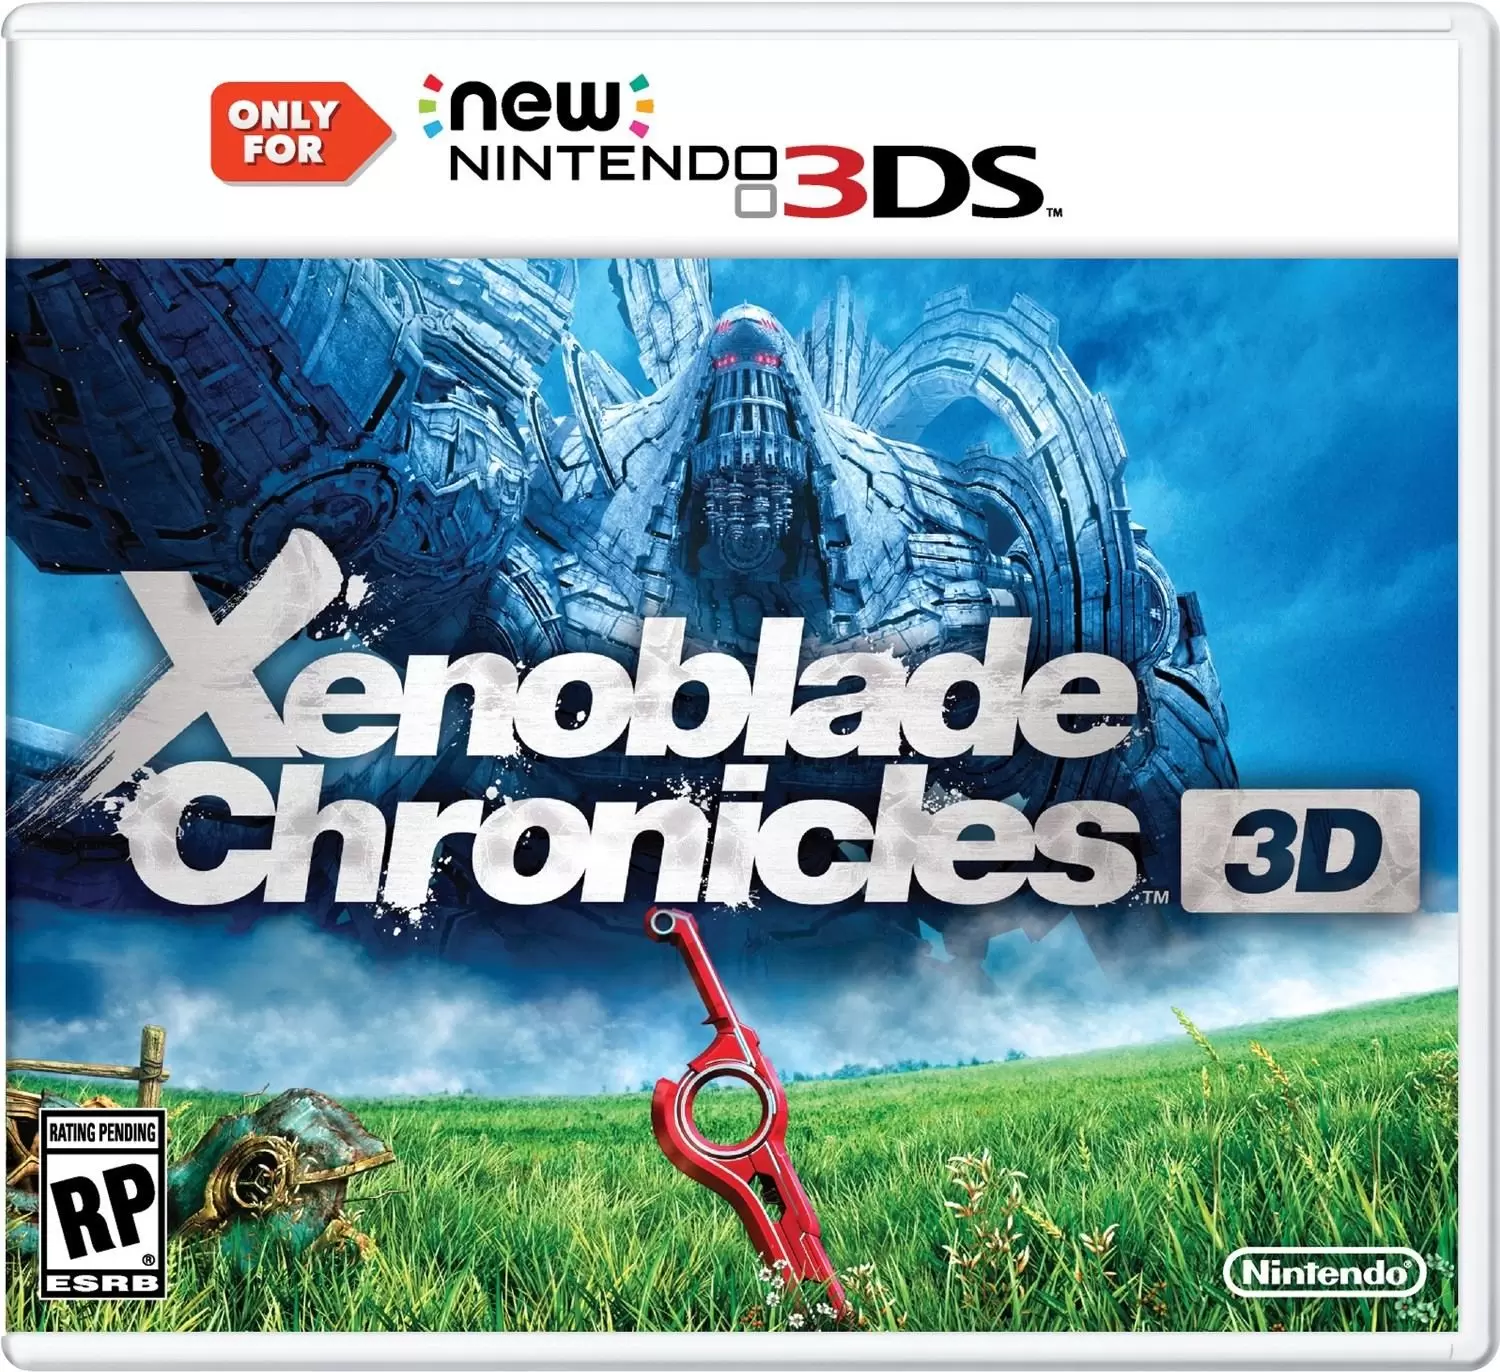 Nintendo 2DS / 3DS Games - Xenoblade Chronicles 3D